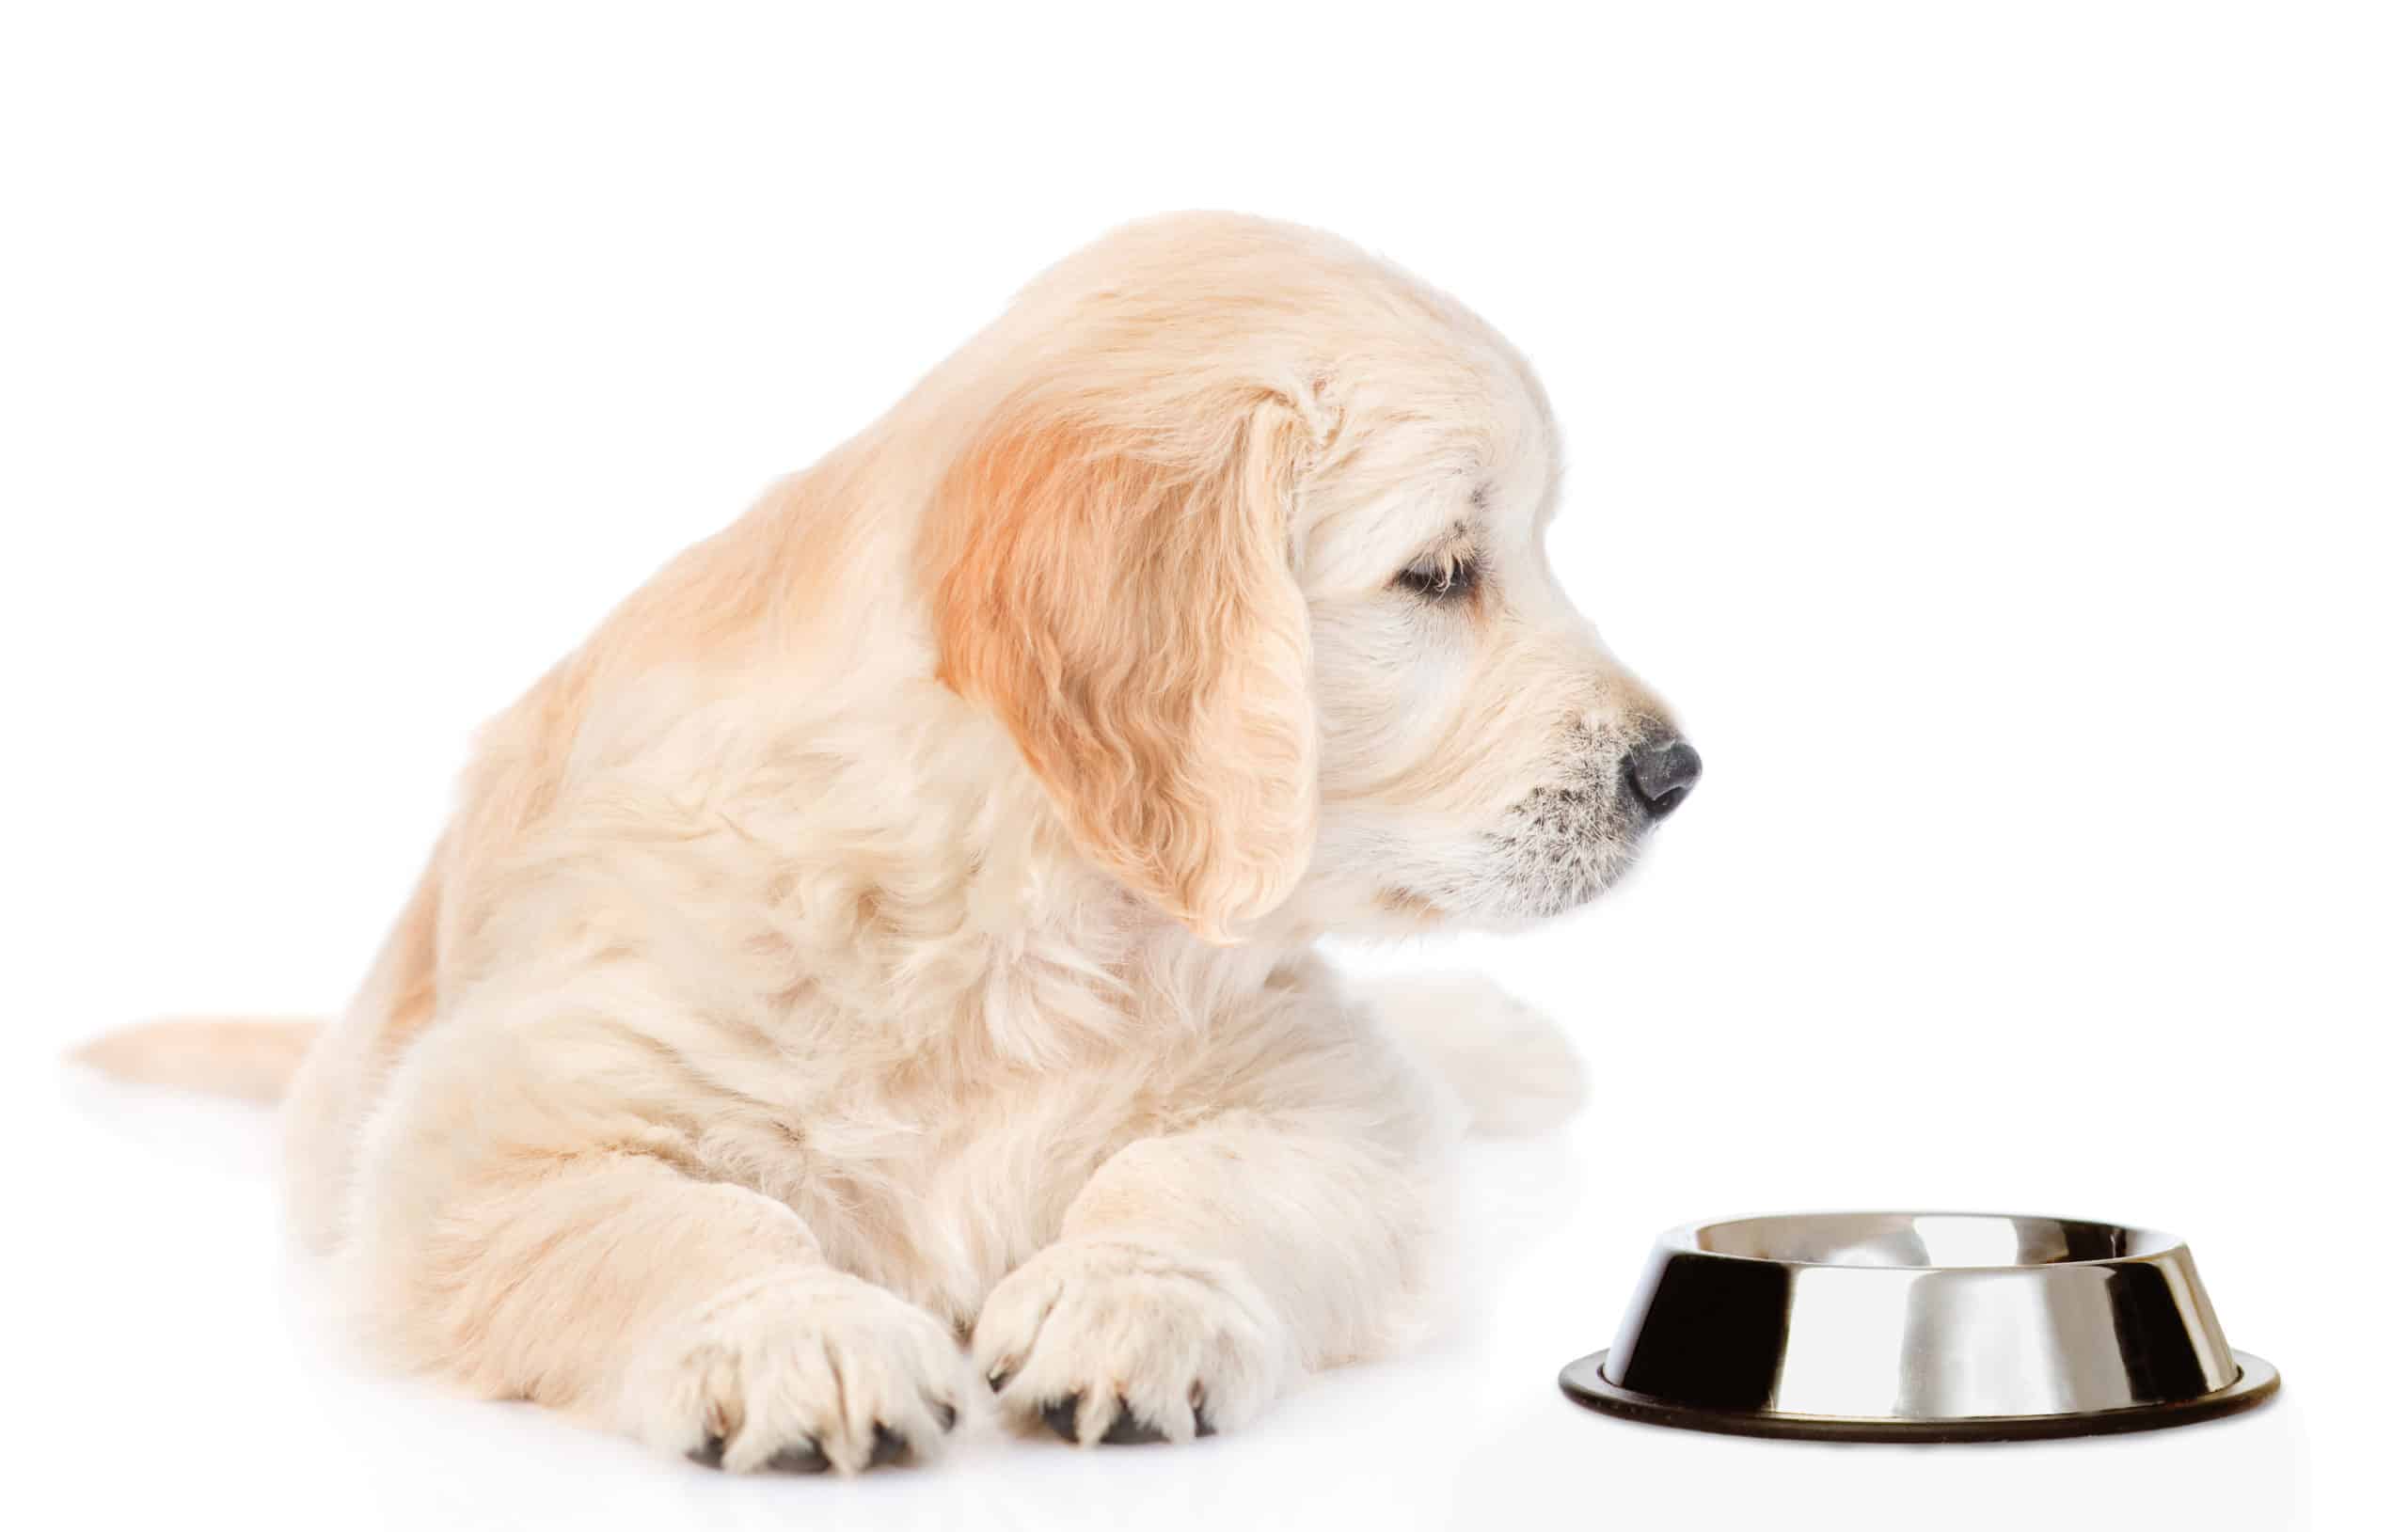 Can Dogs Eat Rice When They Have Diarrhea?